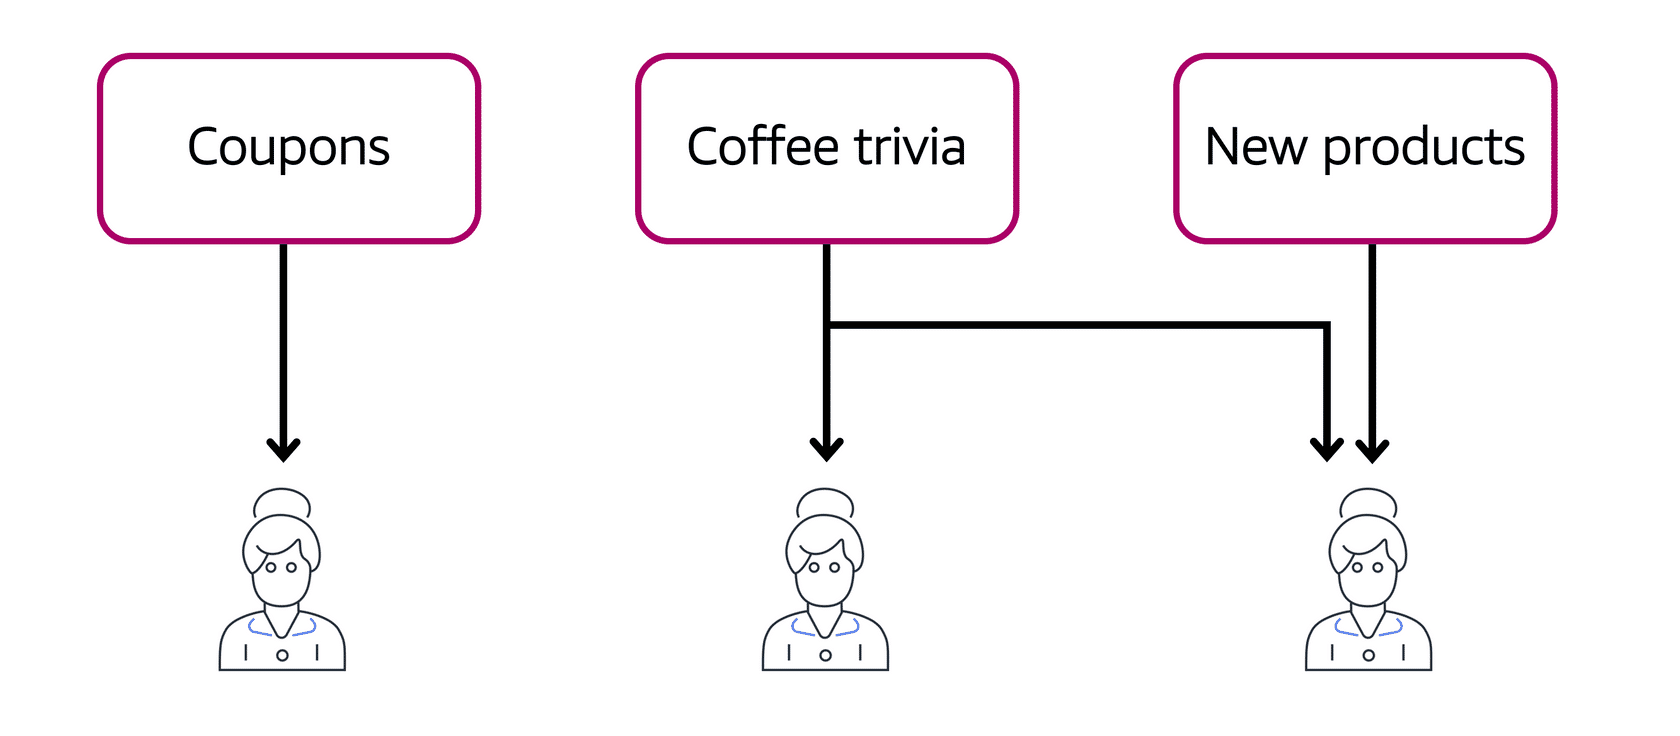 Three people icons with arrows pointing to them with the words Coupons, coffee trivia, and new products above them